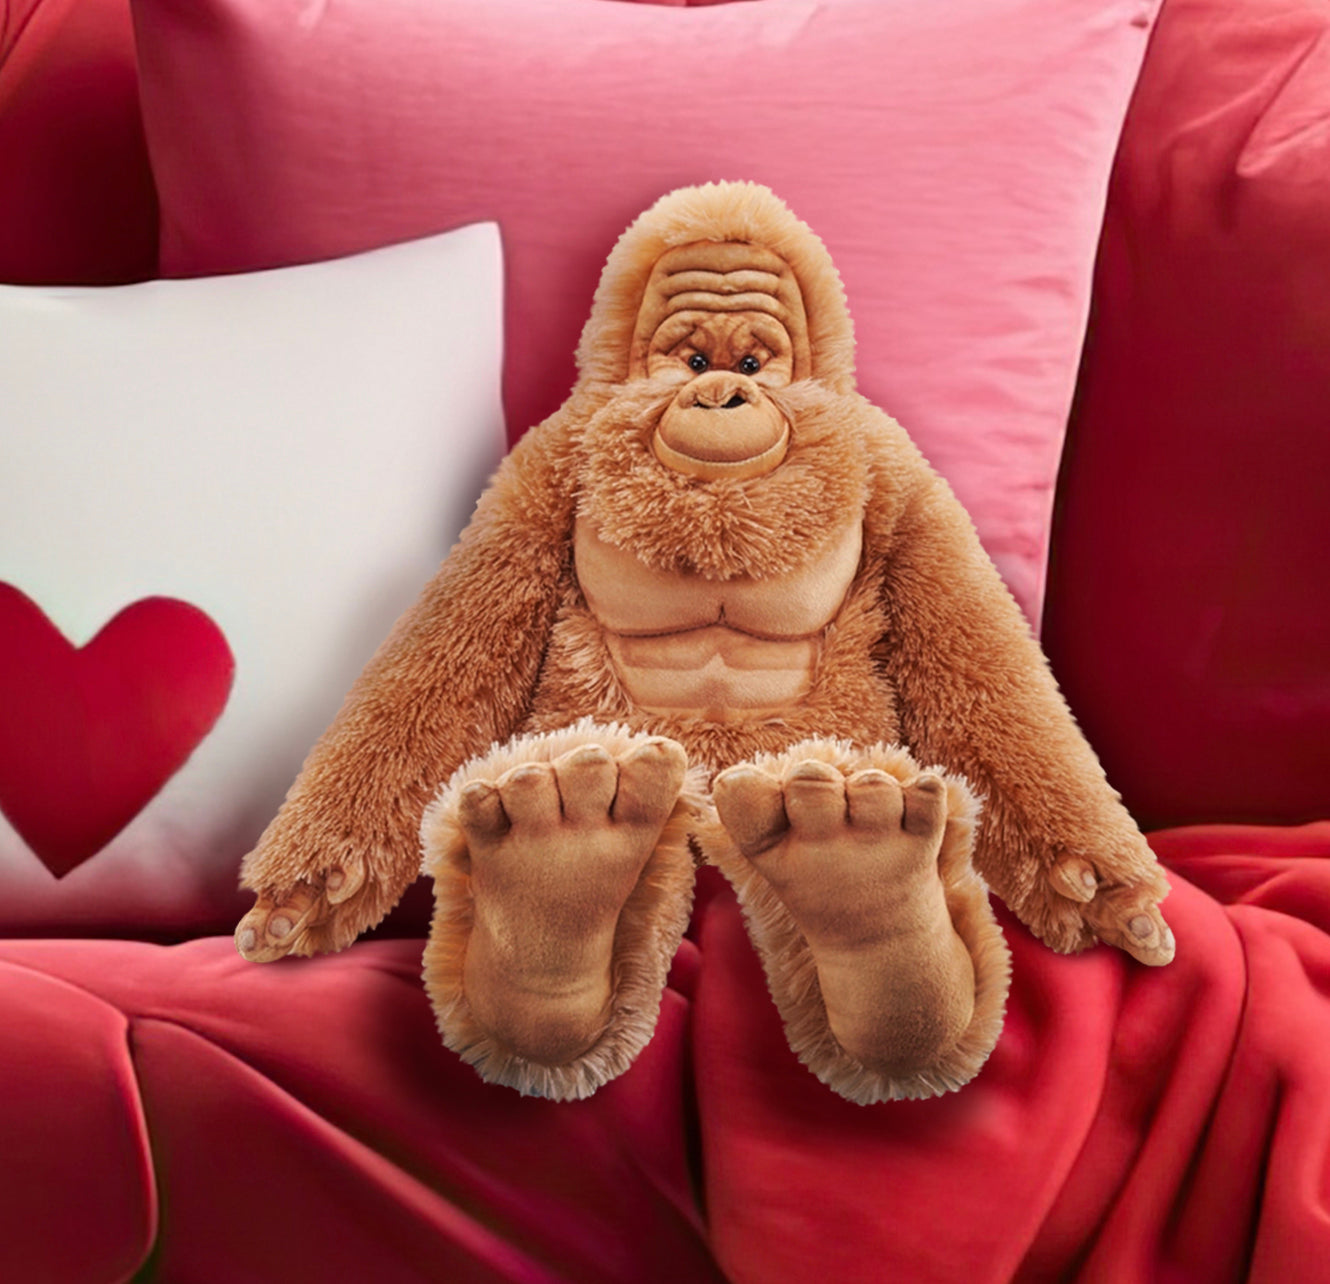 Close up view of a stuffed Bigfoot doll, "sitting" on a red-and-pink couch with throw pillows. The doll has reddish hair, with a light brown wrinkled face and very large brown feet.